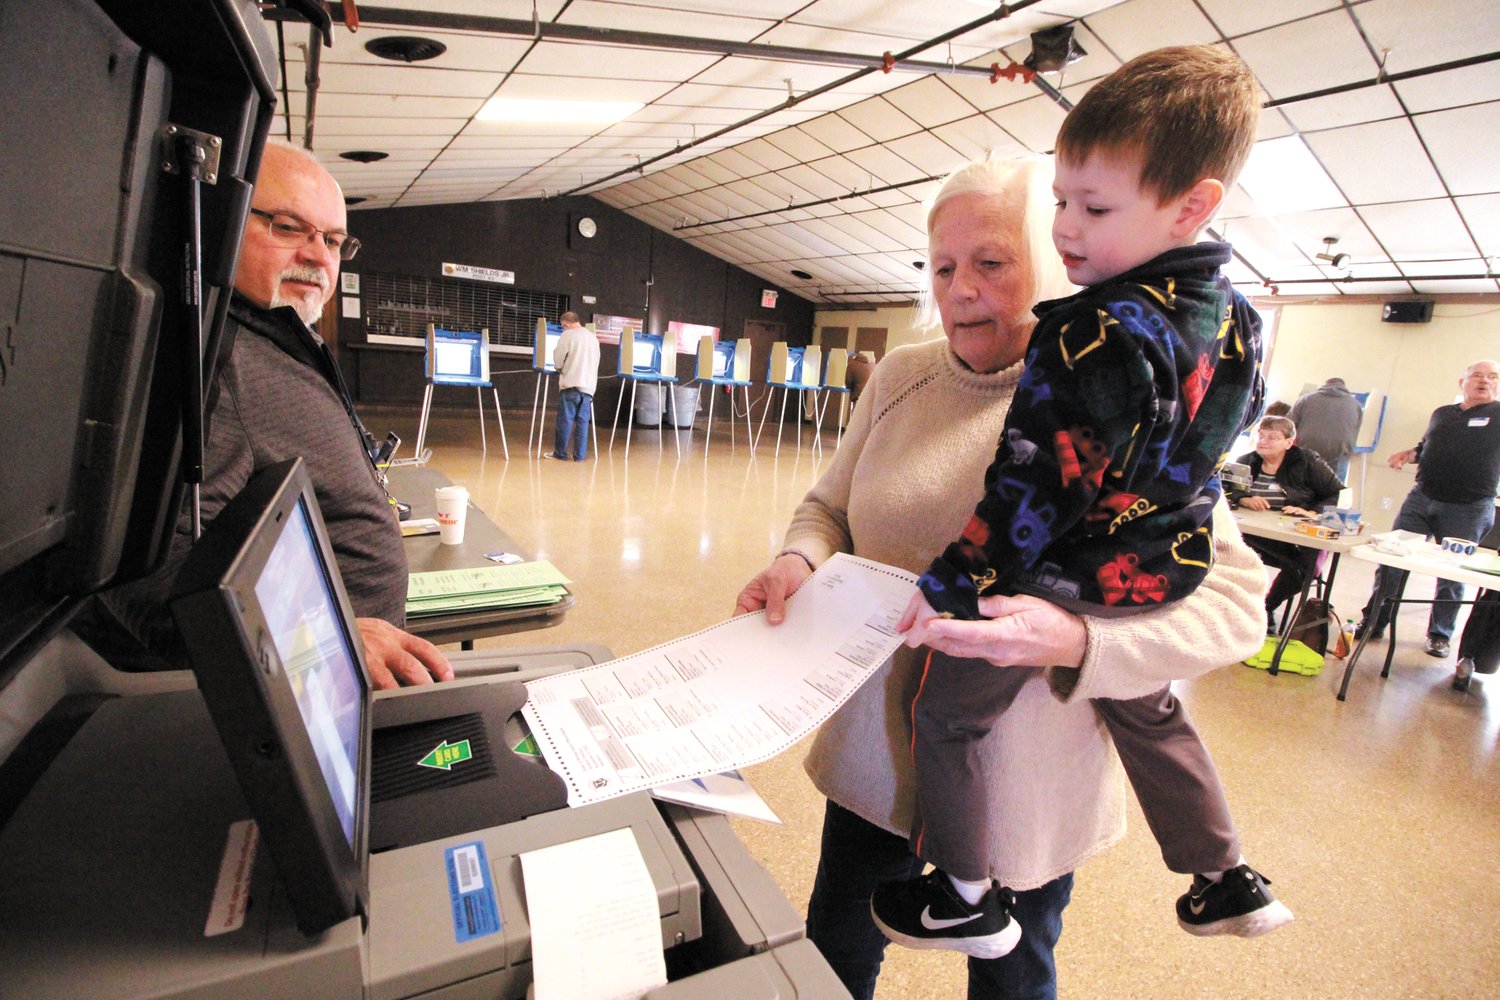 LESSON IN VOTING: Carol Palumbo accompanied by her 4-year-old grandson, Oliver Kennedy, was among the first 100 voters to cast ballots at the William Shield Post poll in Conimicut. Oliver got to feed his grandmother’s ballot into the machine and an “I voted” sticker